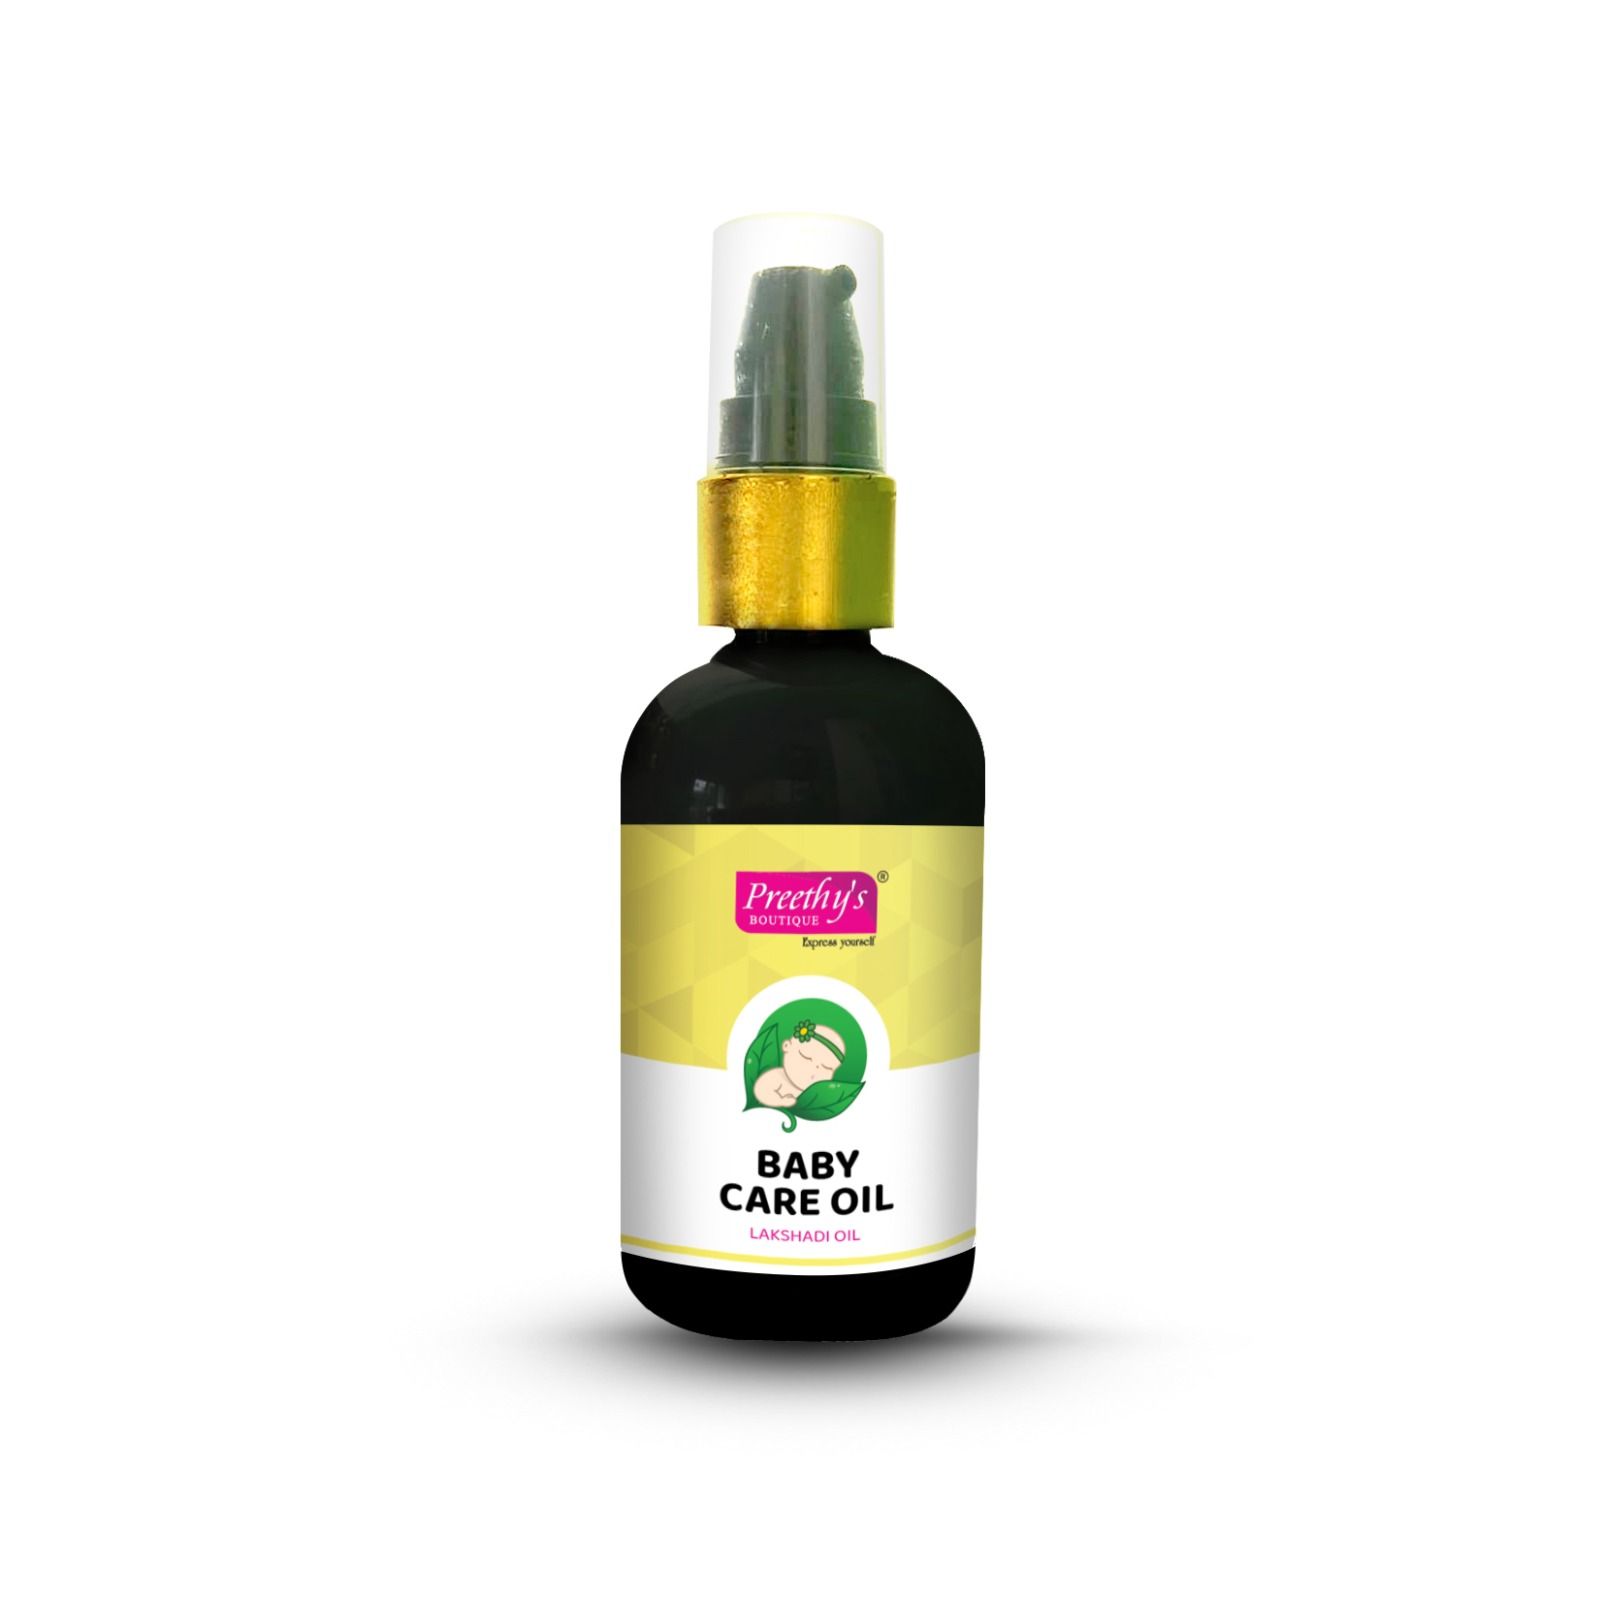 Preethy's Boutique Baby Care Oil (Lakshadi Oil)